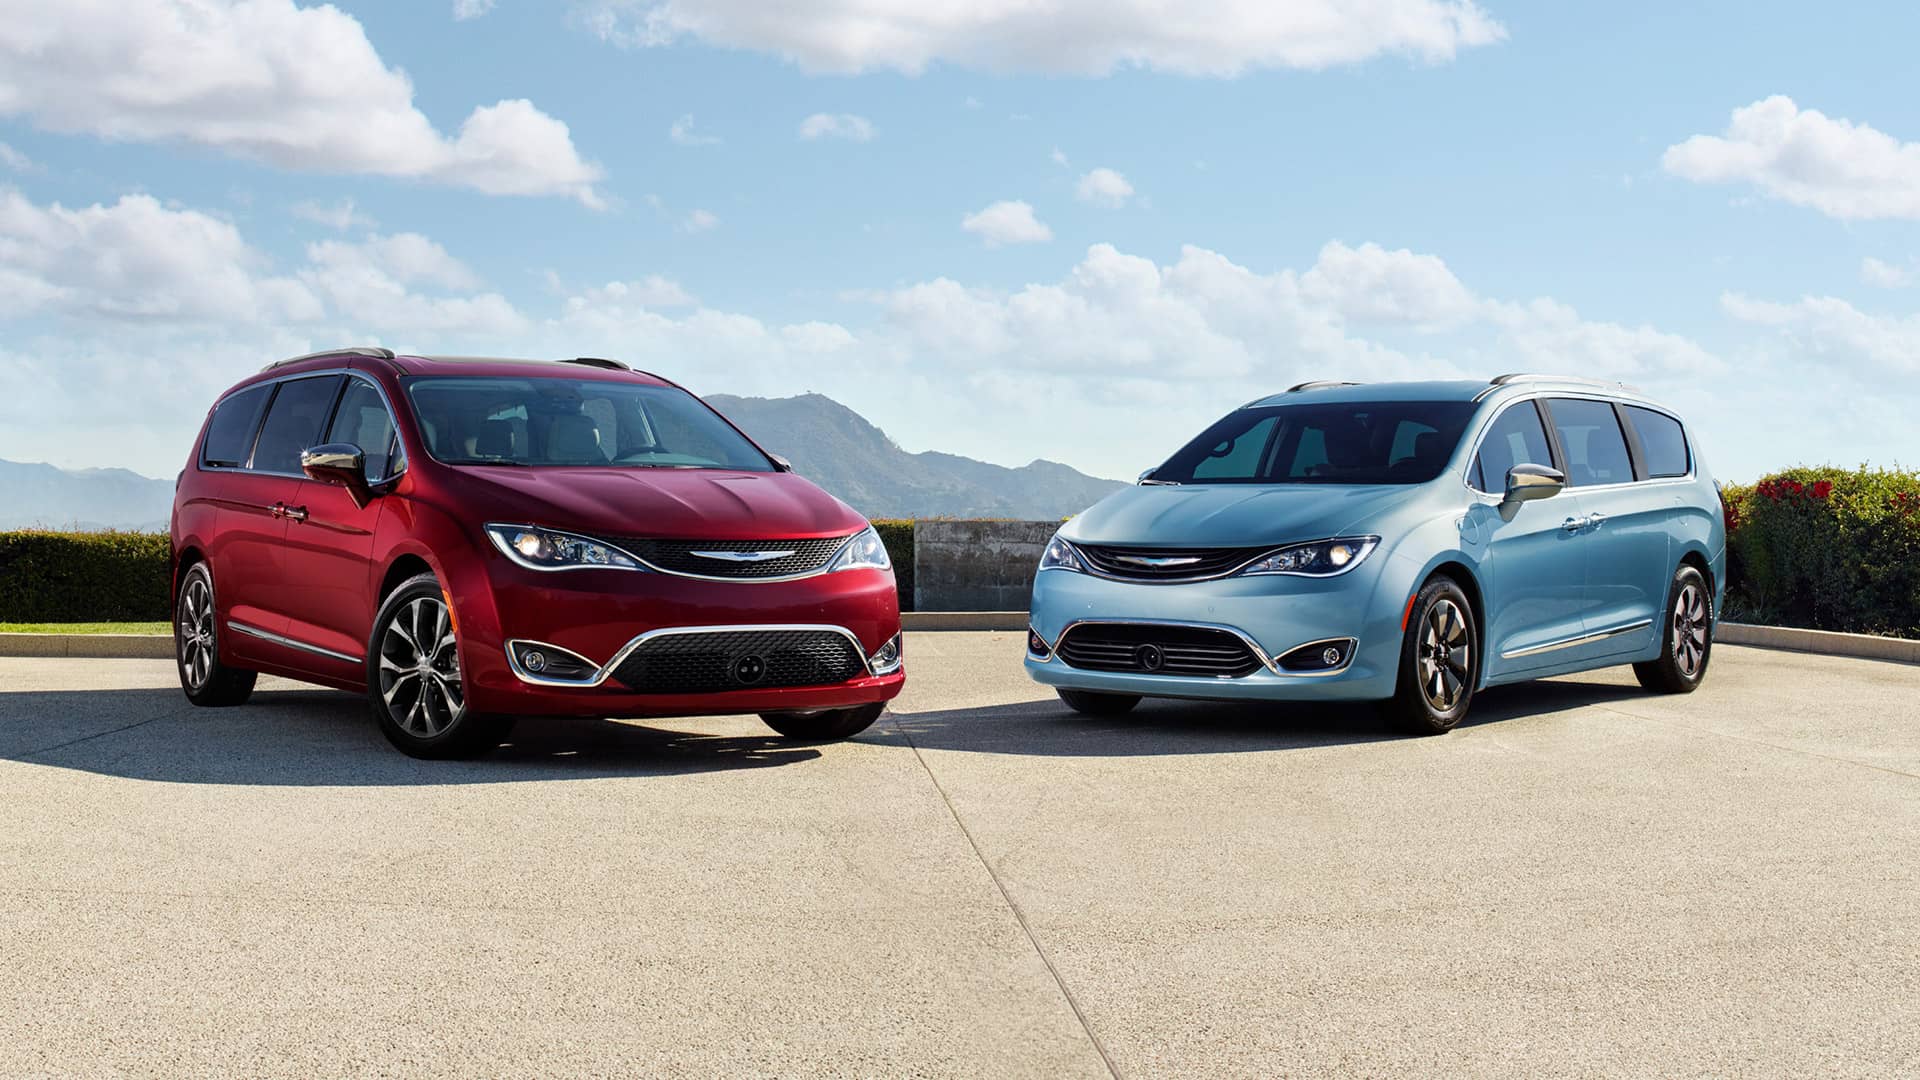 Pacifica Minivan Is Sure To Be A Family Favorite